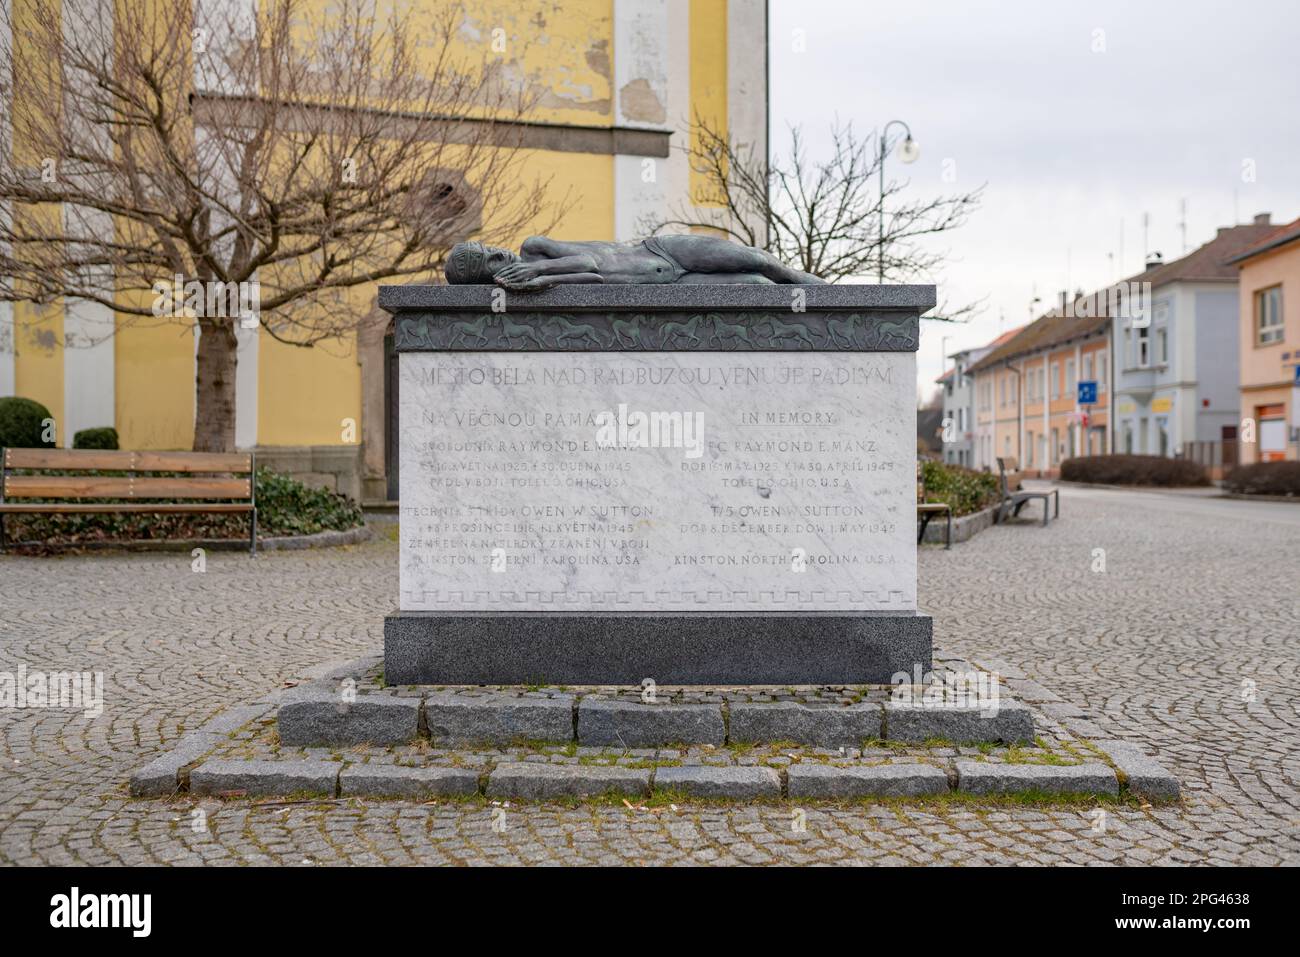 Monument to two fallen American soldiers from 42nd Reconnaissance Cavalry Squadron, killed during liberation of Czechoslovakia, in Bela nad Radbuzou. Stock Photo